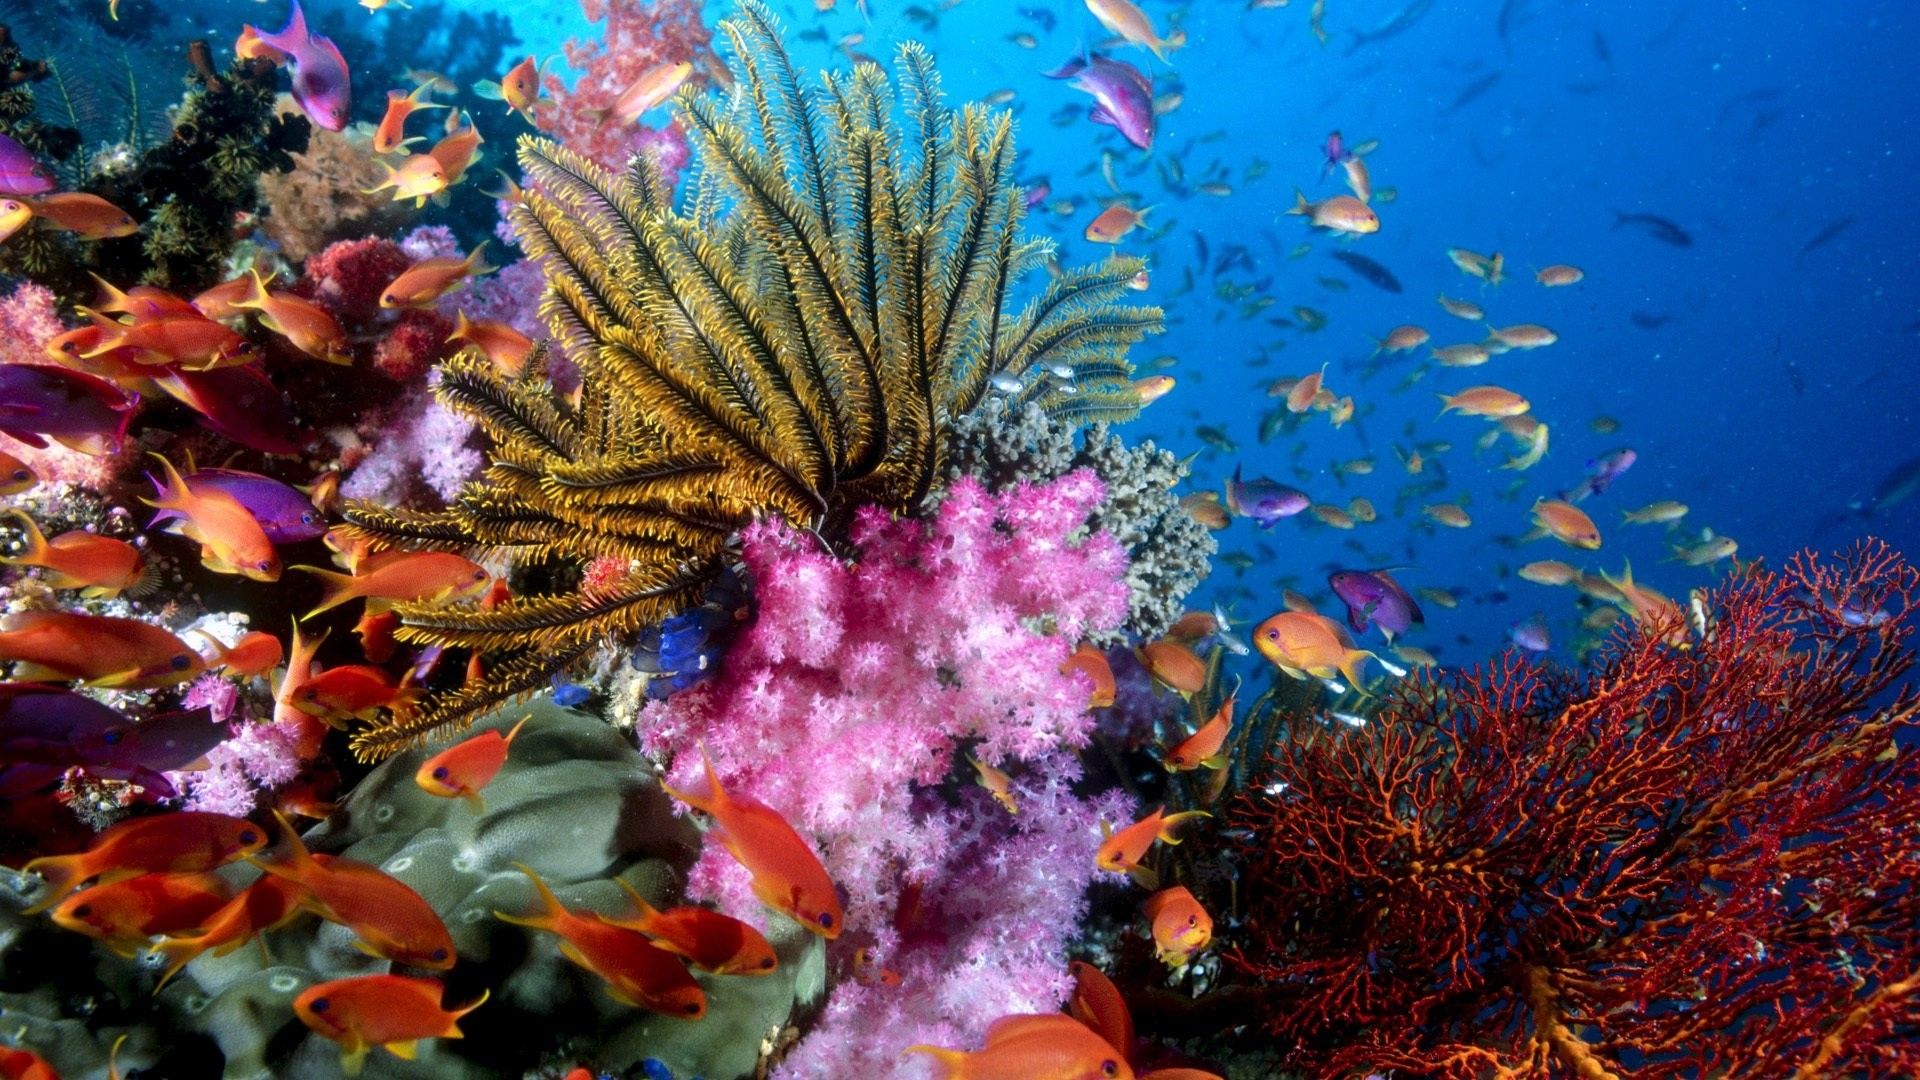 Colorful coral reef with a school of fish swimming - Coral